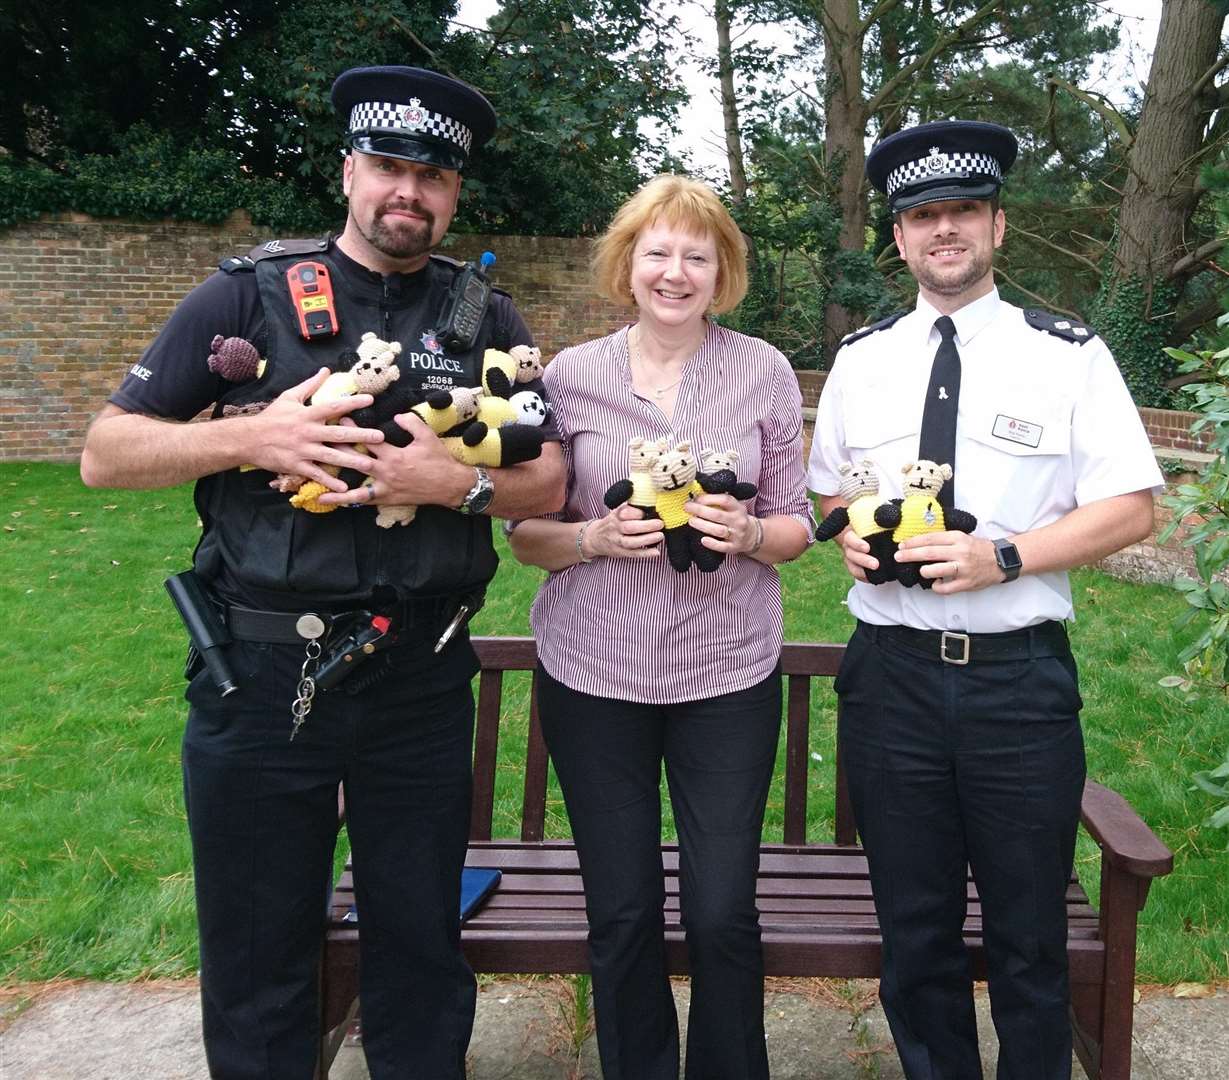 Angela Howells, town clerk of Westerham Council, hands over Bobby Buddies from ‘Knit n Natter’ to Sergeant Pete Ballard and Insp Nick Finnis (4495334)